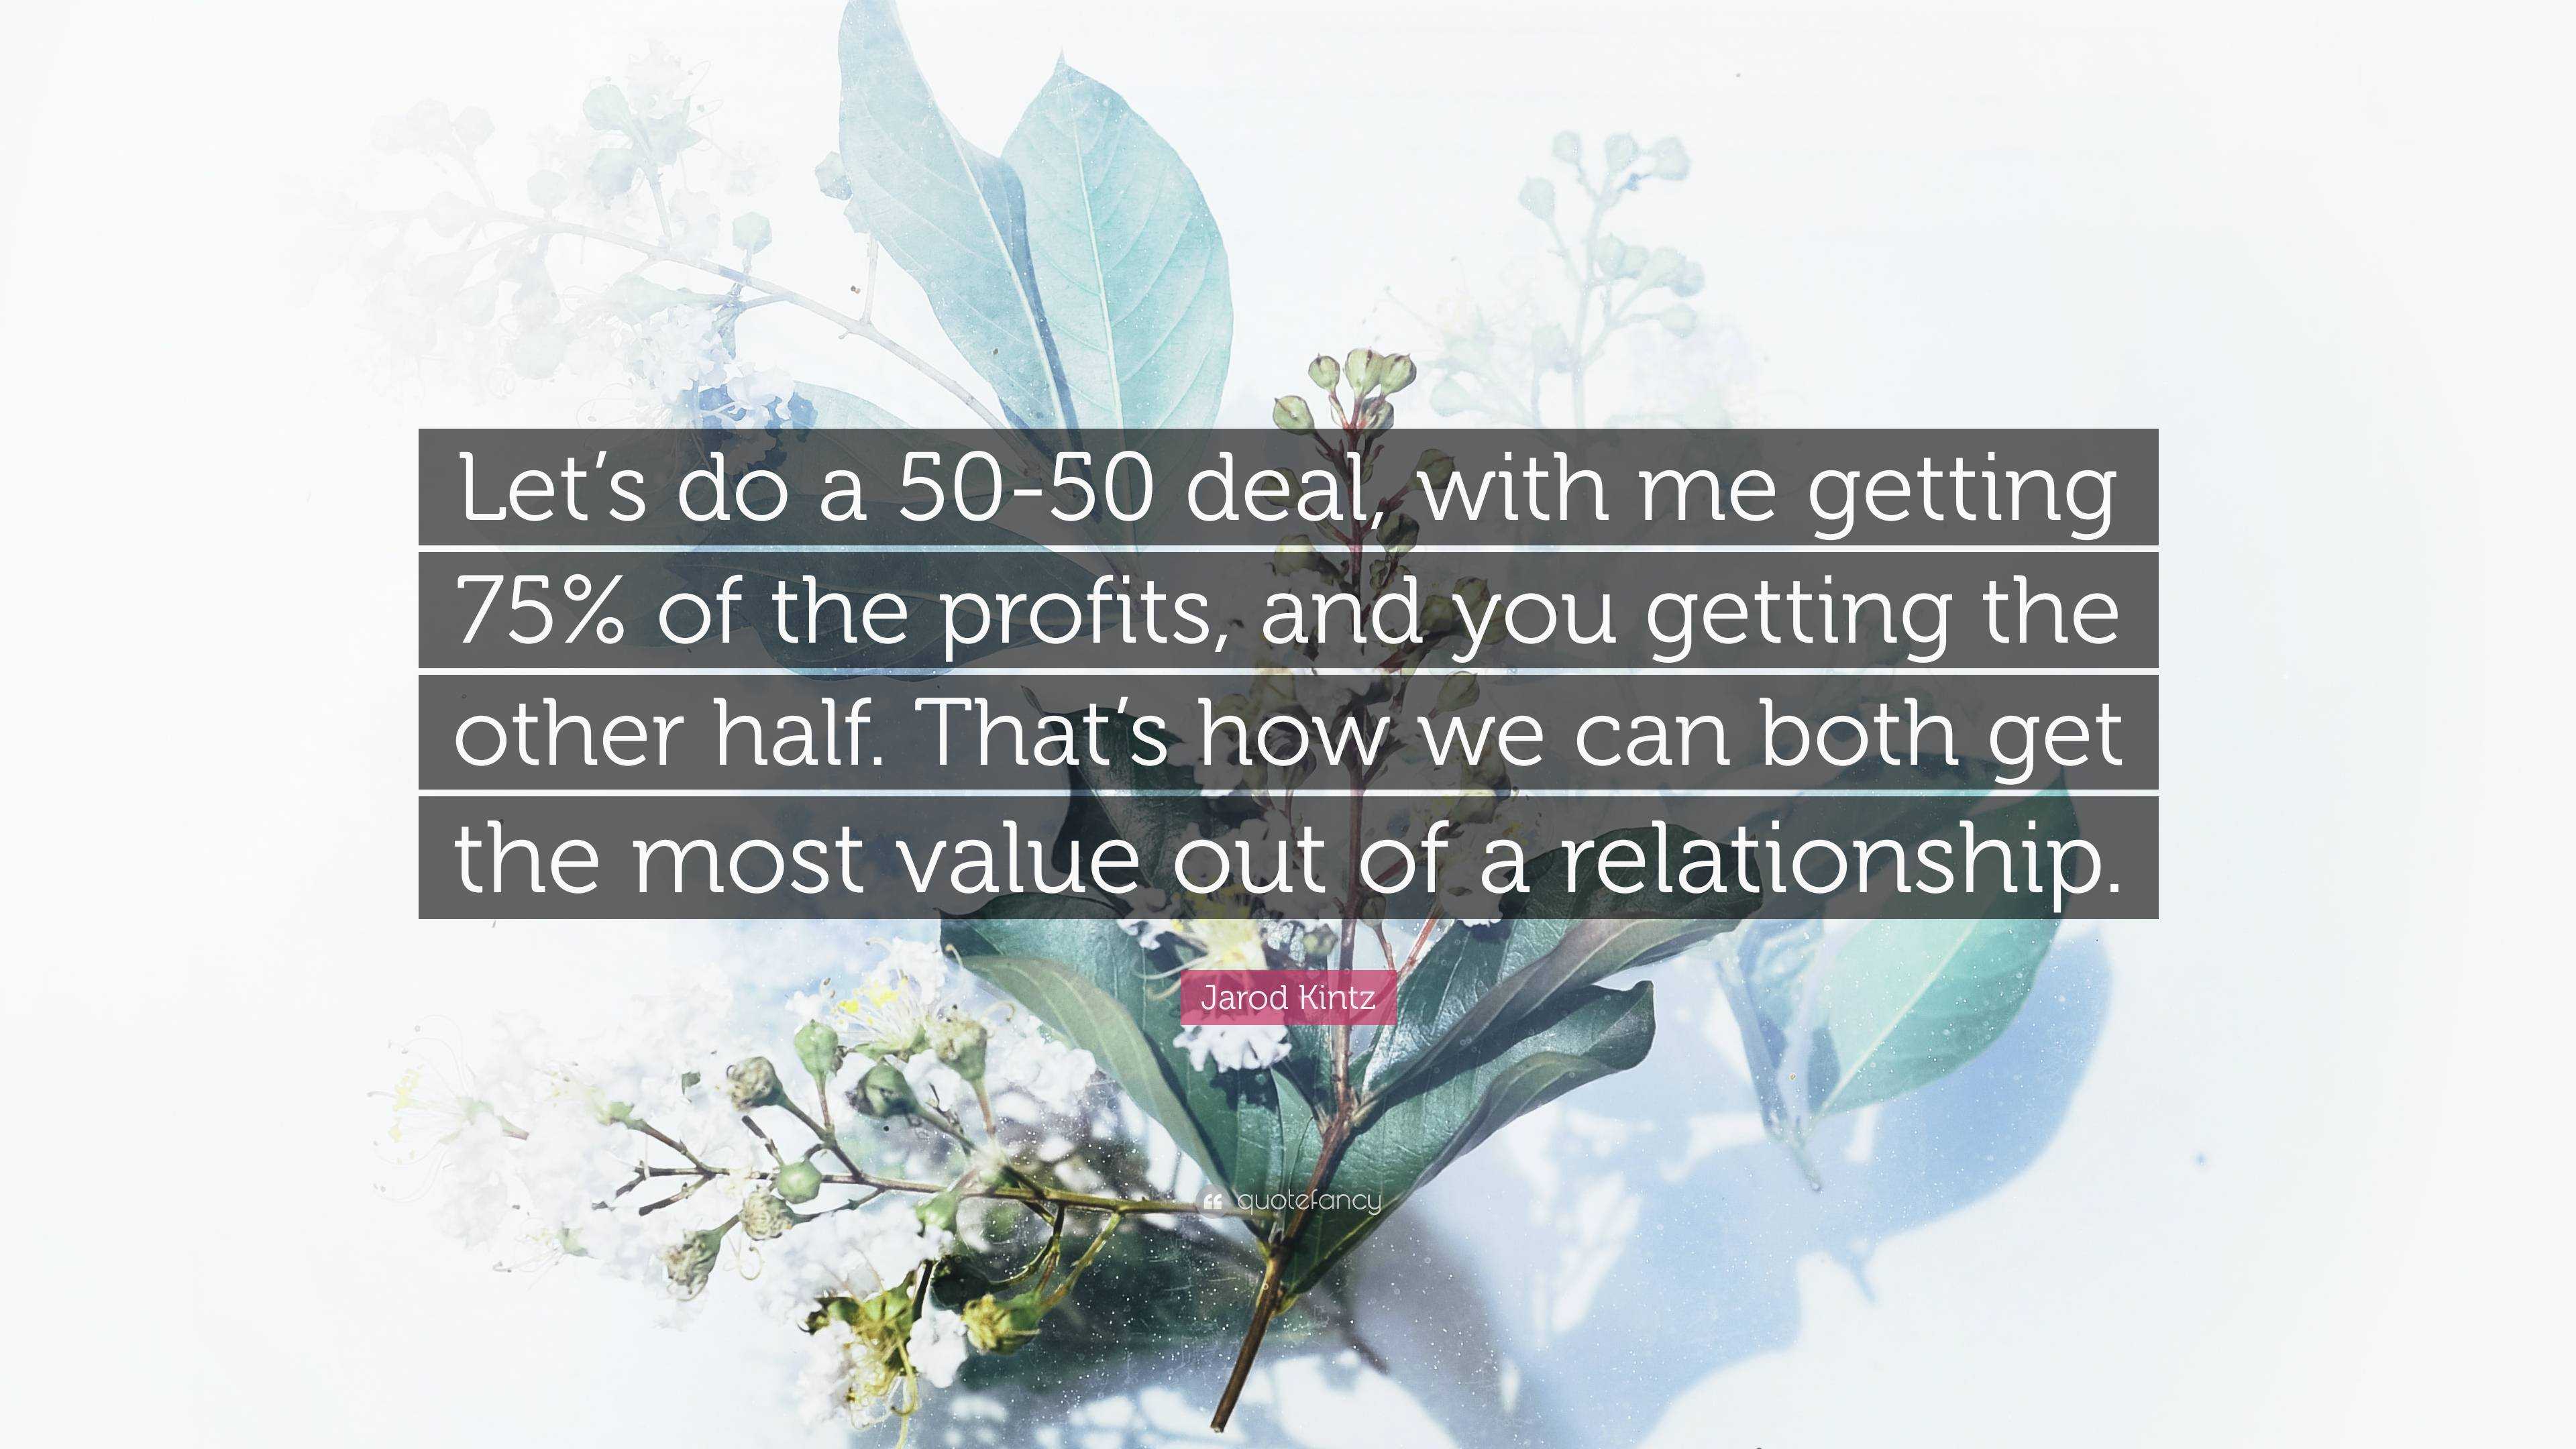 https://quotefancy.com/media/wallpaper/3840x2160/6484670-Jarod-Kintz-Quote-Let-s-do-a-50-50-deal-with-me-getting-75-of-the.jpg